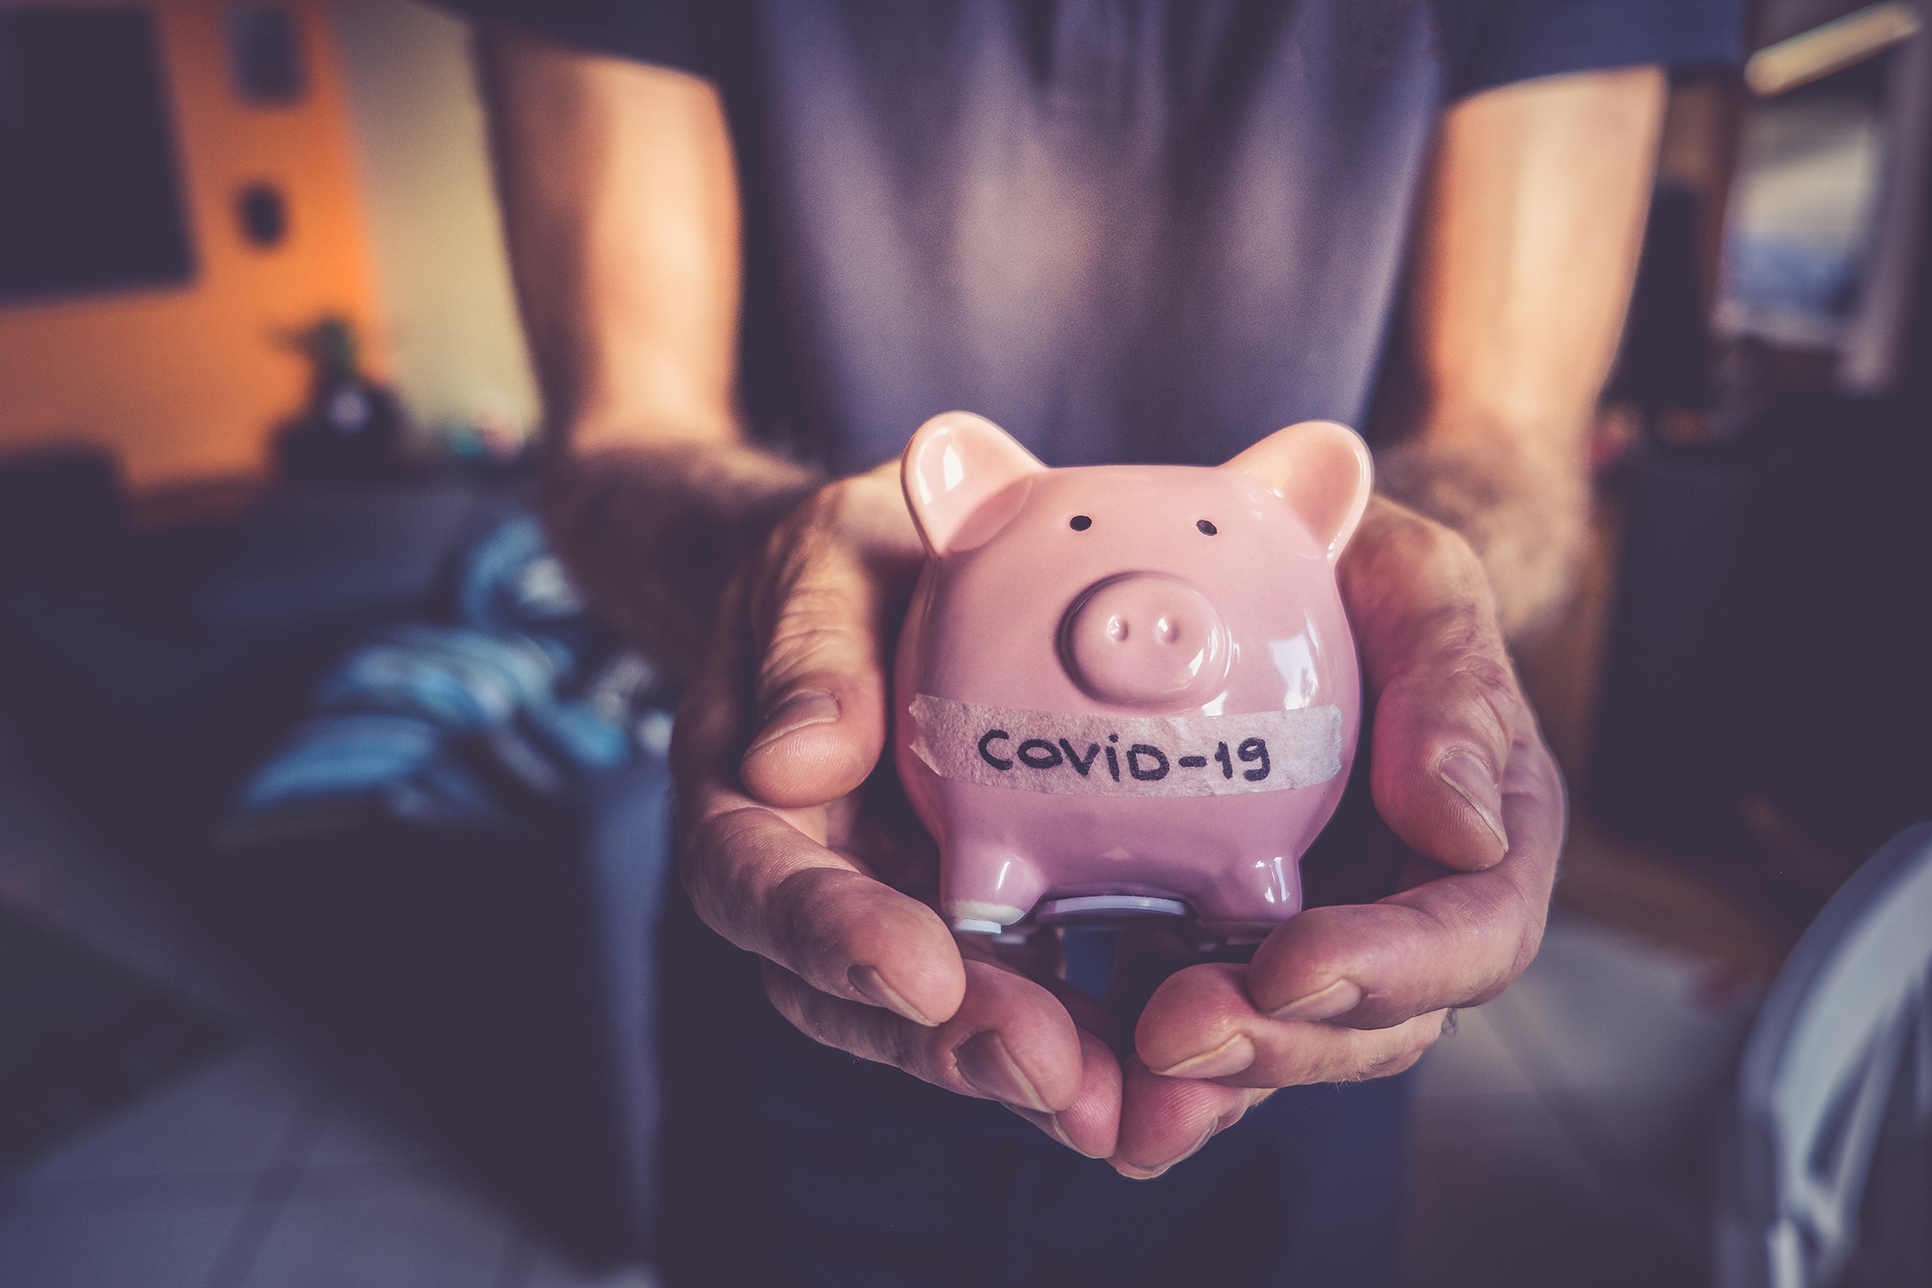 A person holding a piggy bank with the words "COVID-19" on it.